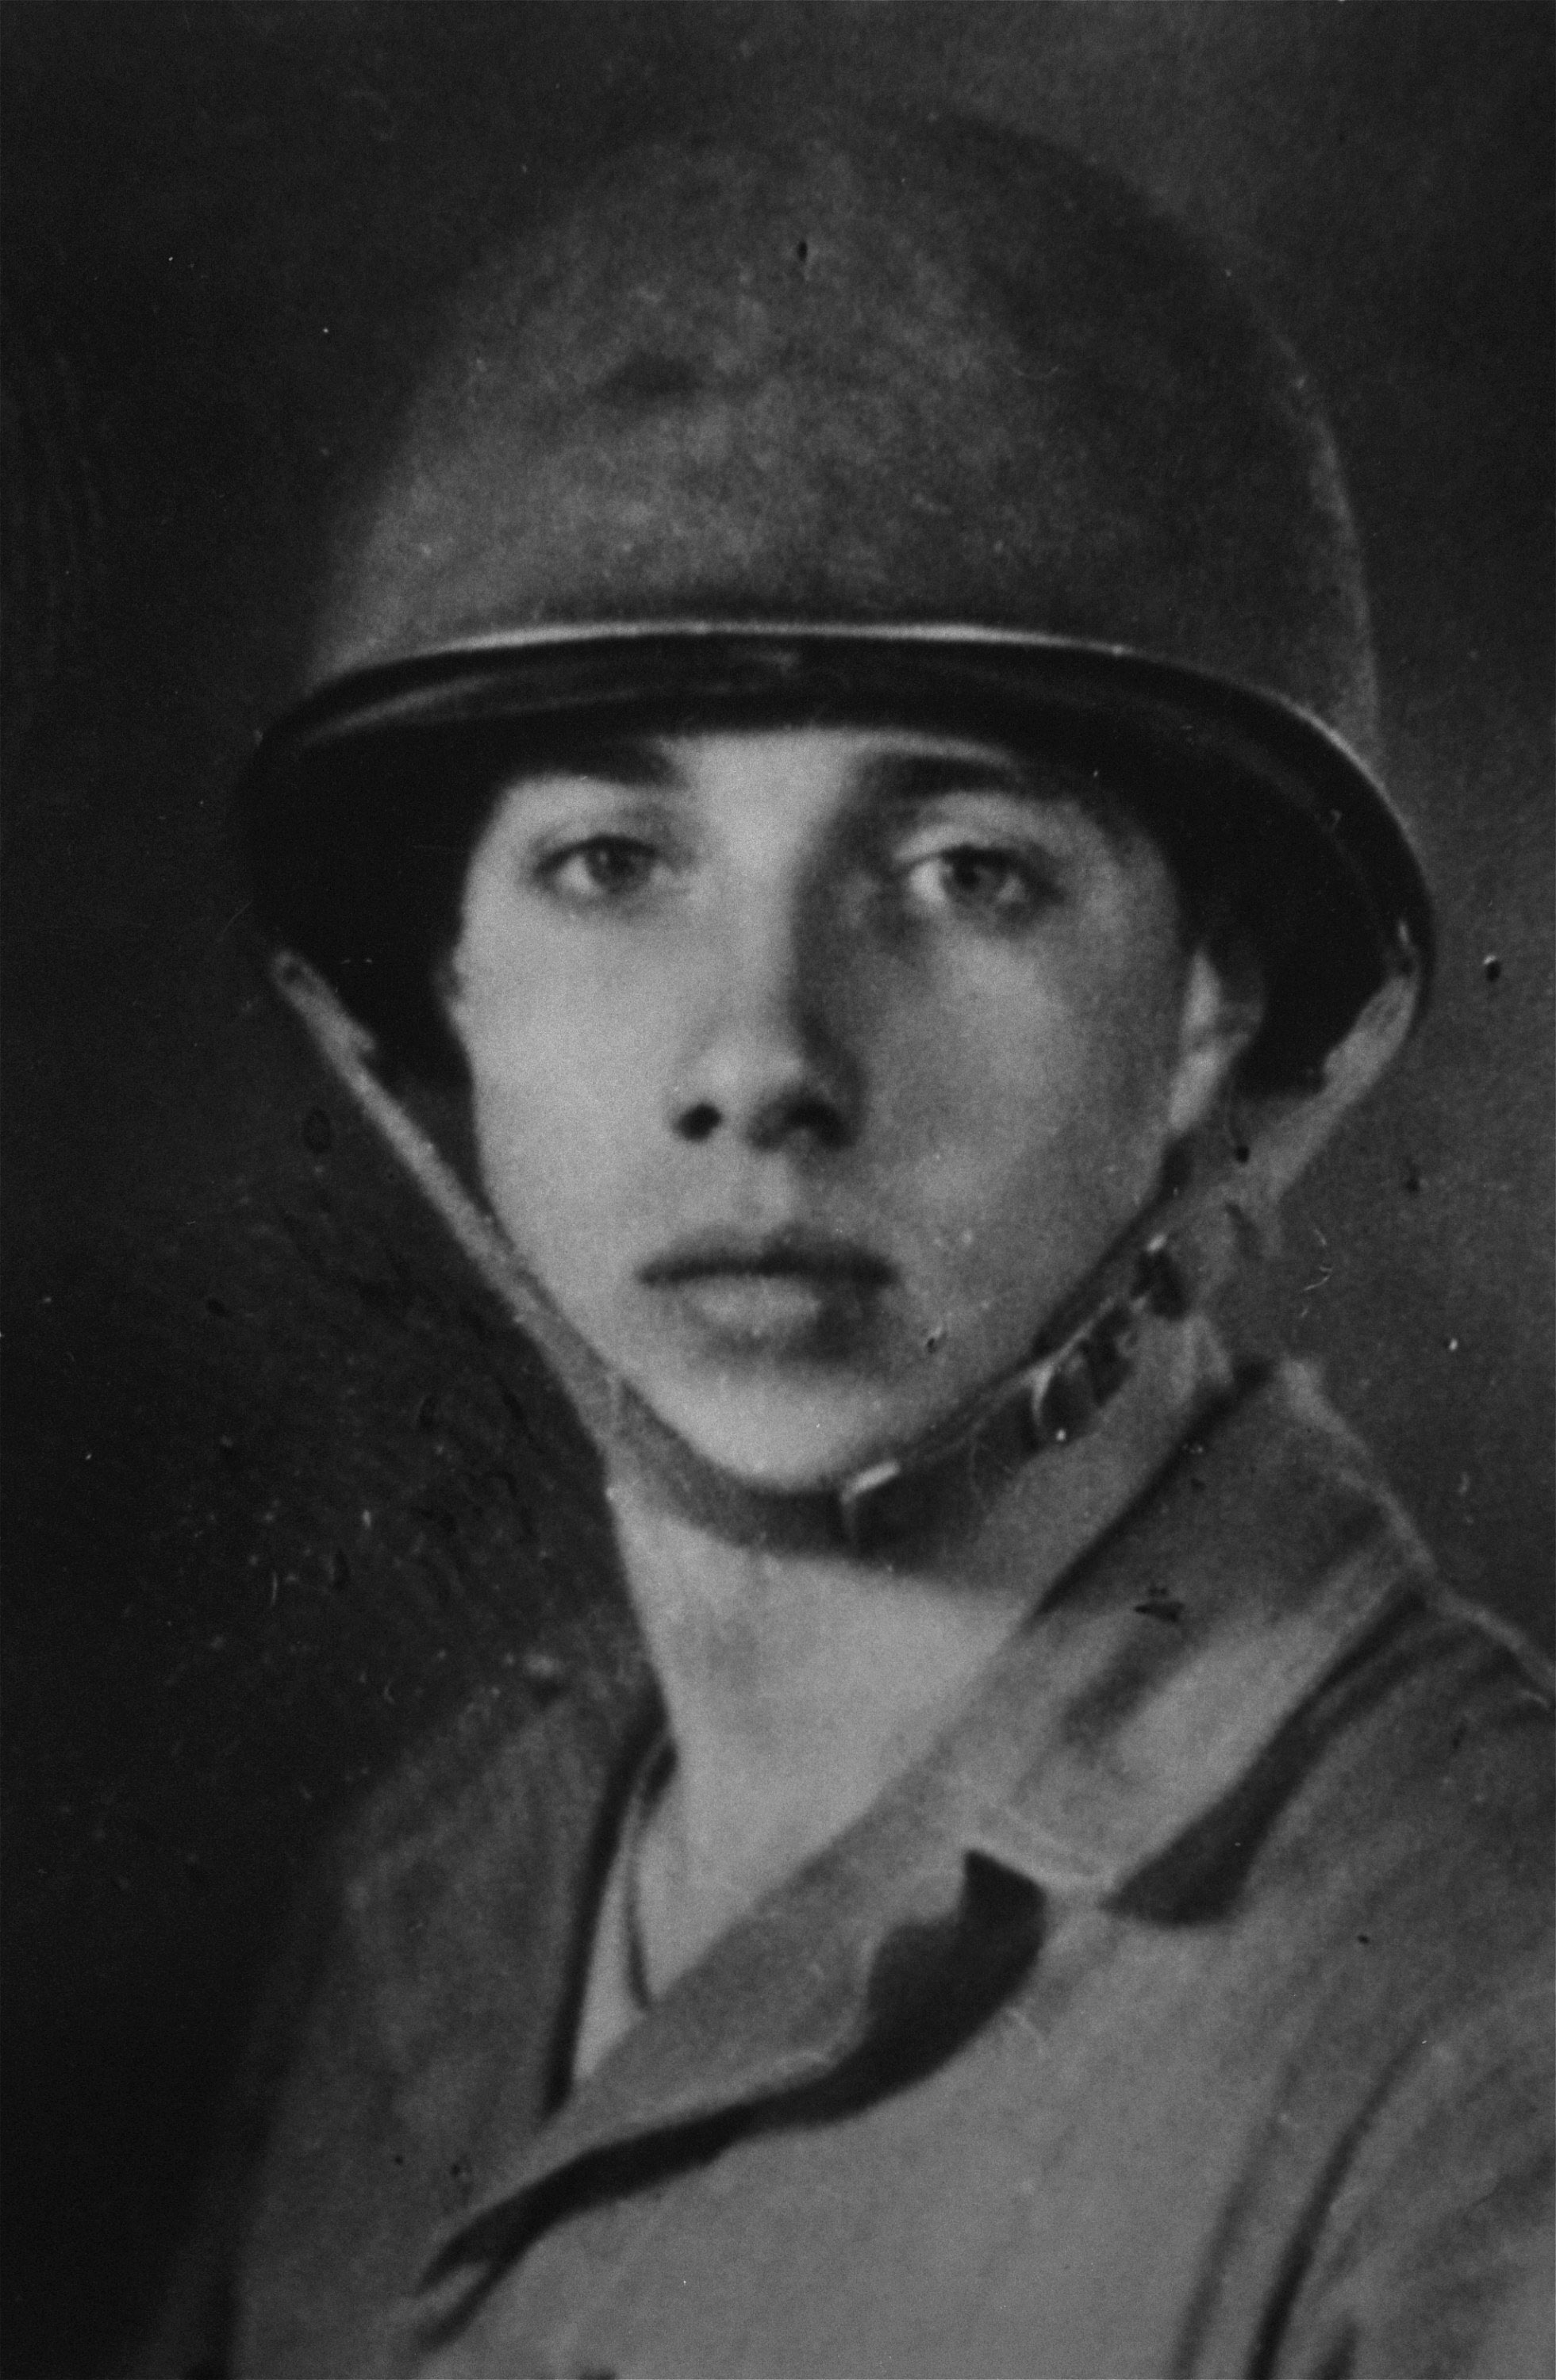 Sent to fight in Italy in 1945, Bob Dole was seriously wounded while trying to carry a fellow soldier to safety. He spent 39 gruelling months in and out of hospitals, recuperating from his near fatal injuries, which left his right arm permanently disabled and his left arm minimally functional.